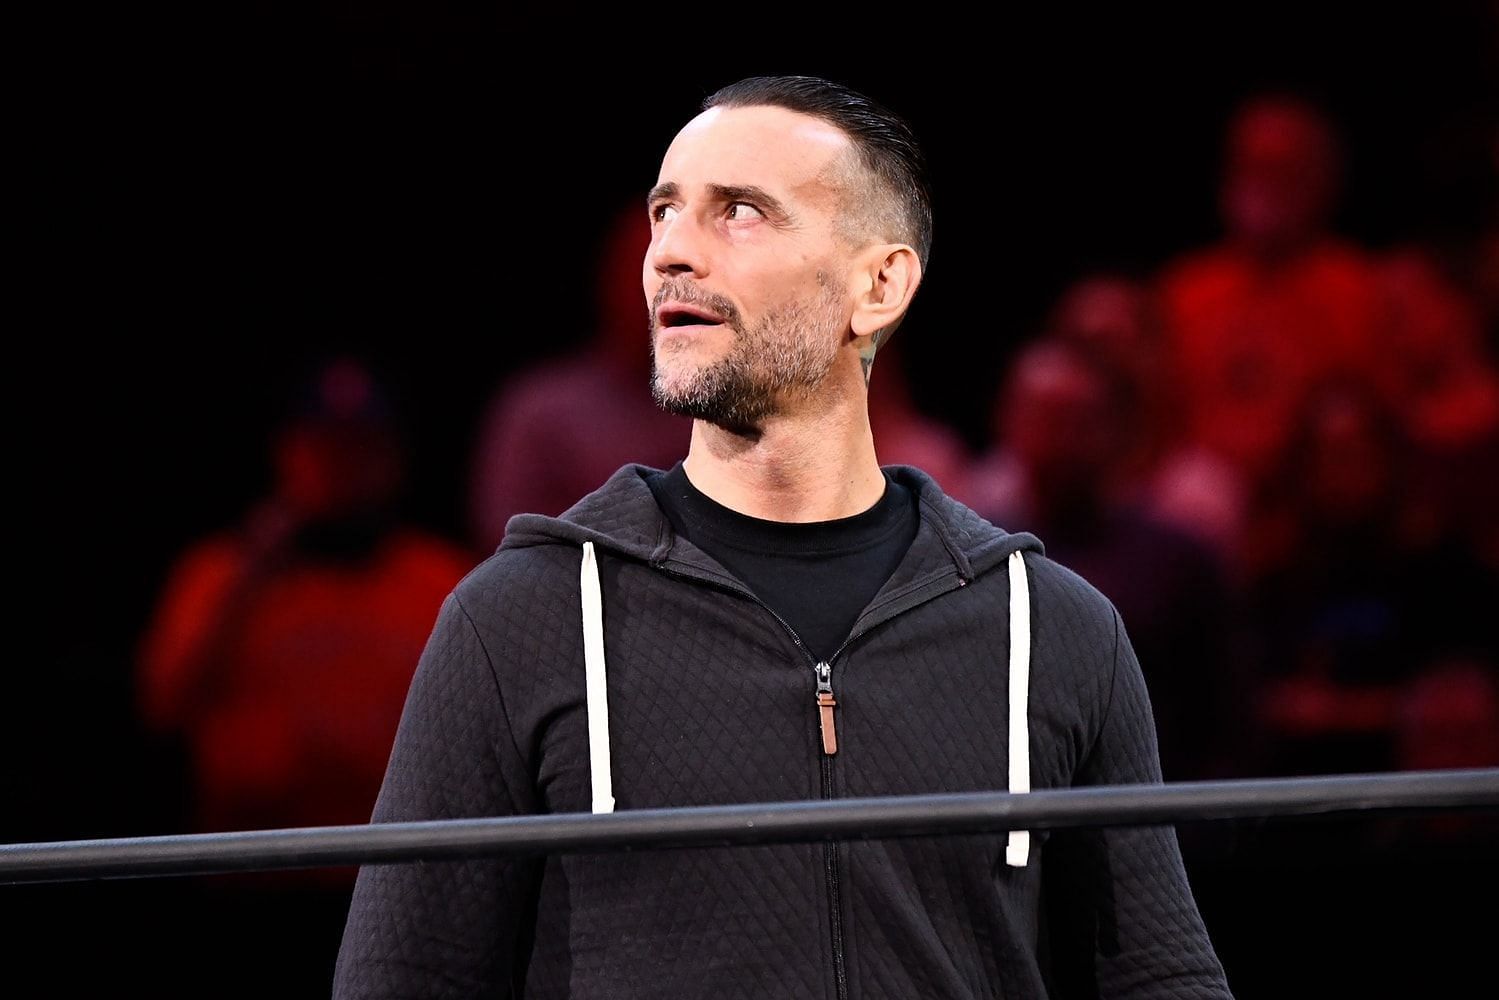 CM Punk during an AEW television taping